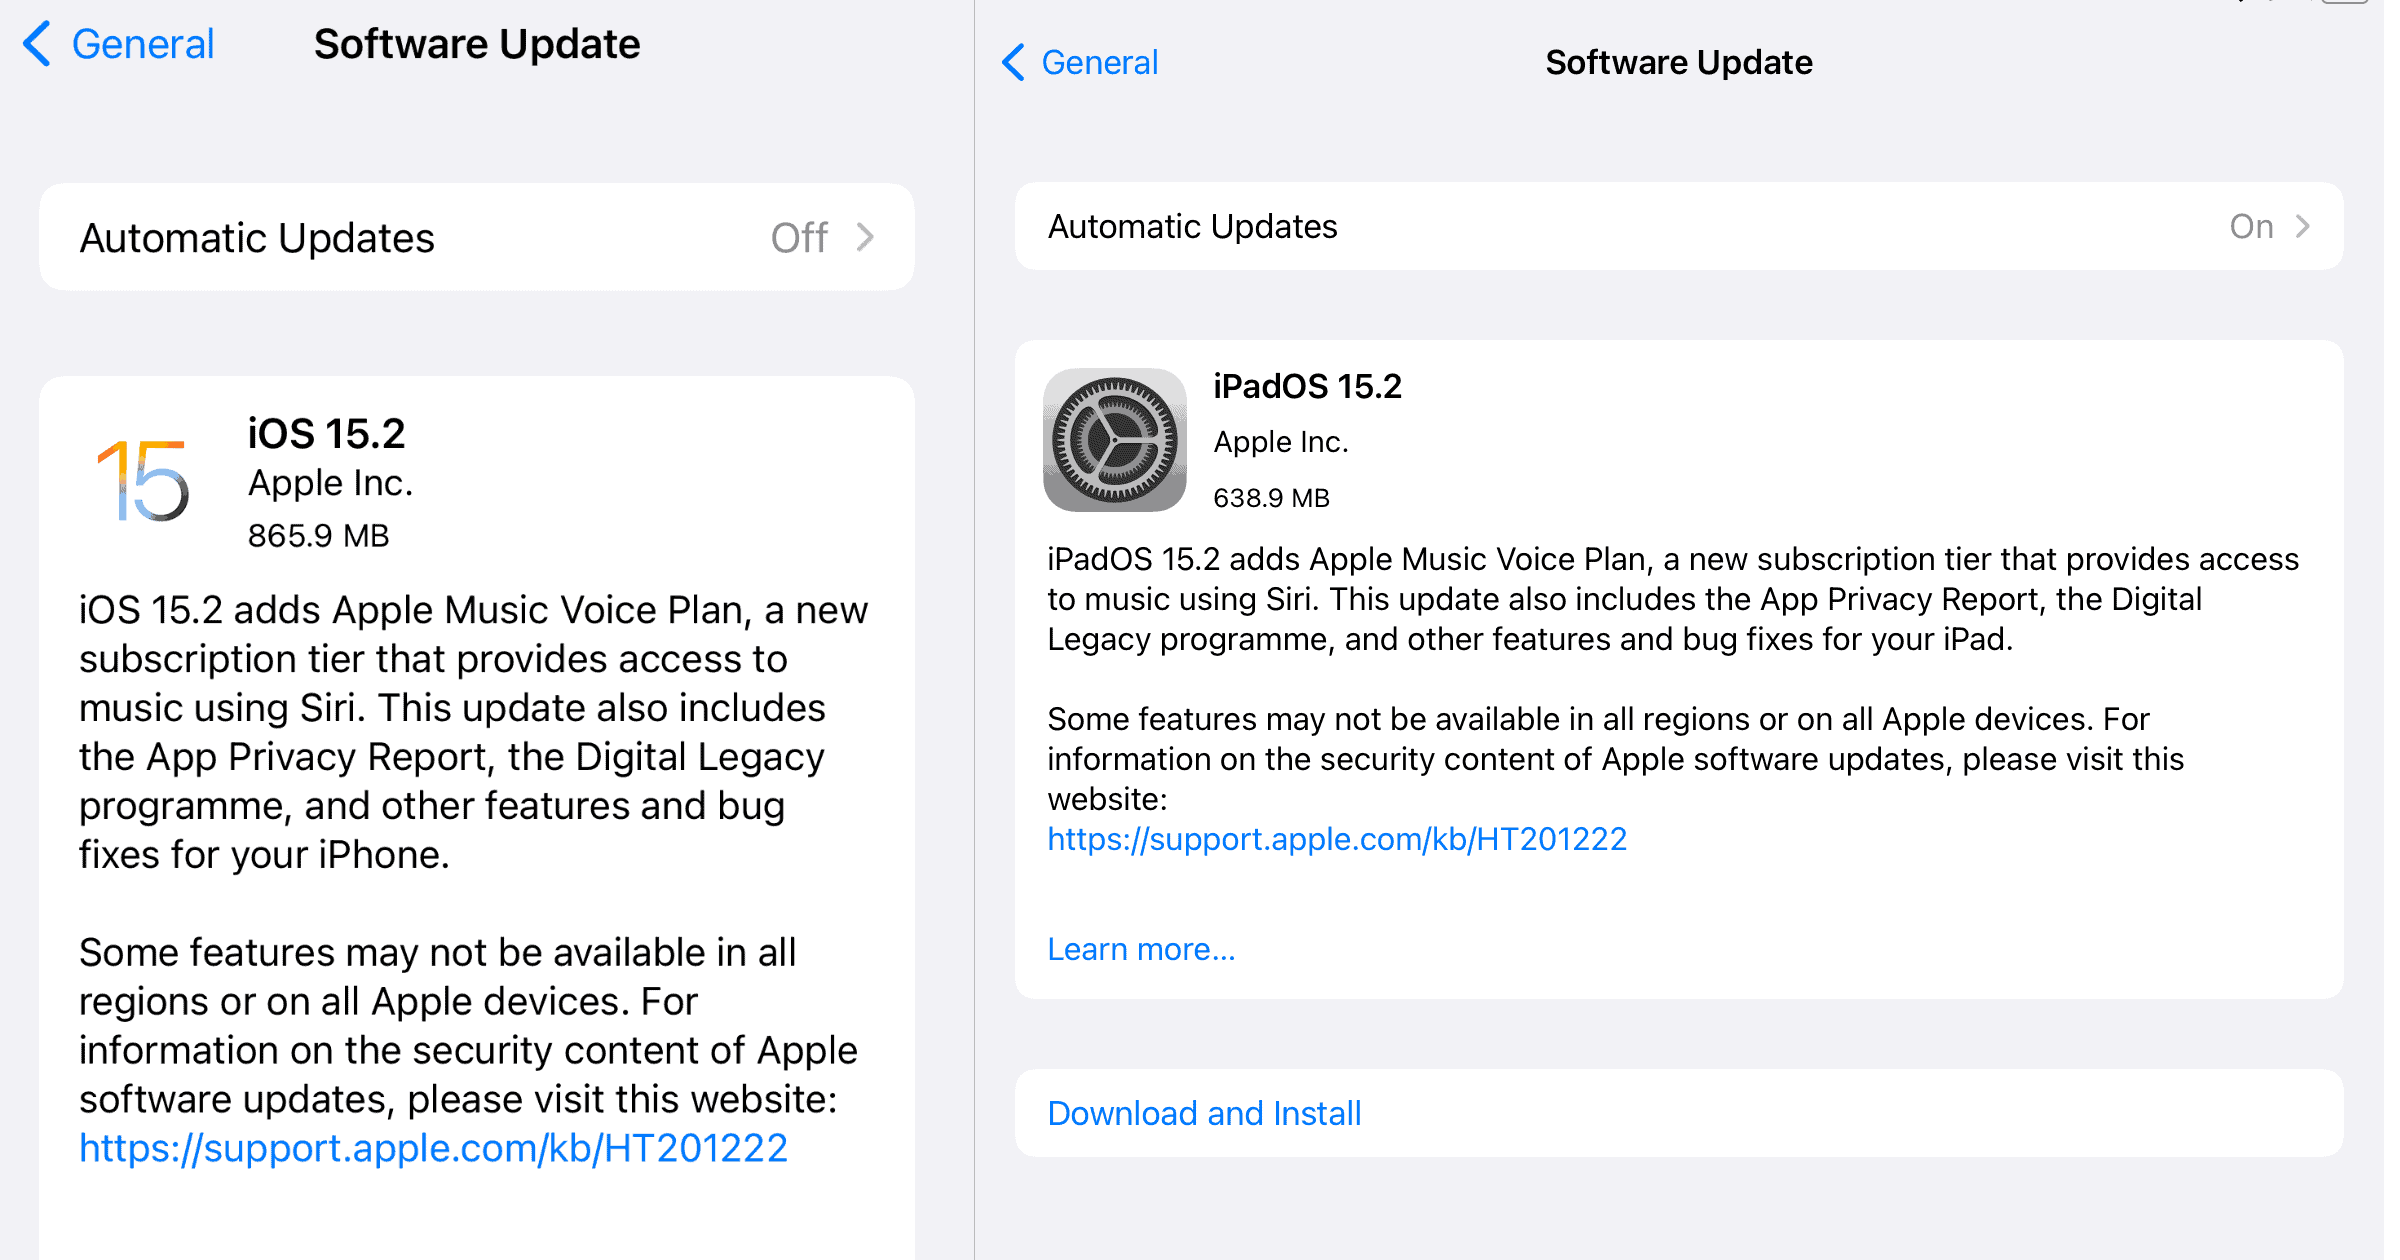 Apple Releases iOS and iPadOS 15.2 With Voice Plan and App Privacy Report [Updated]